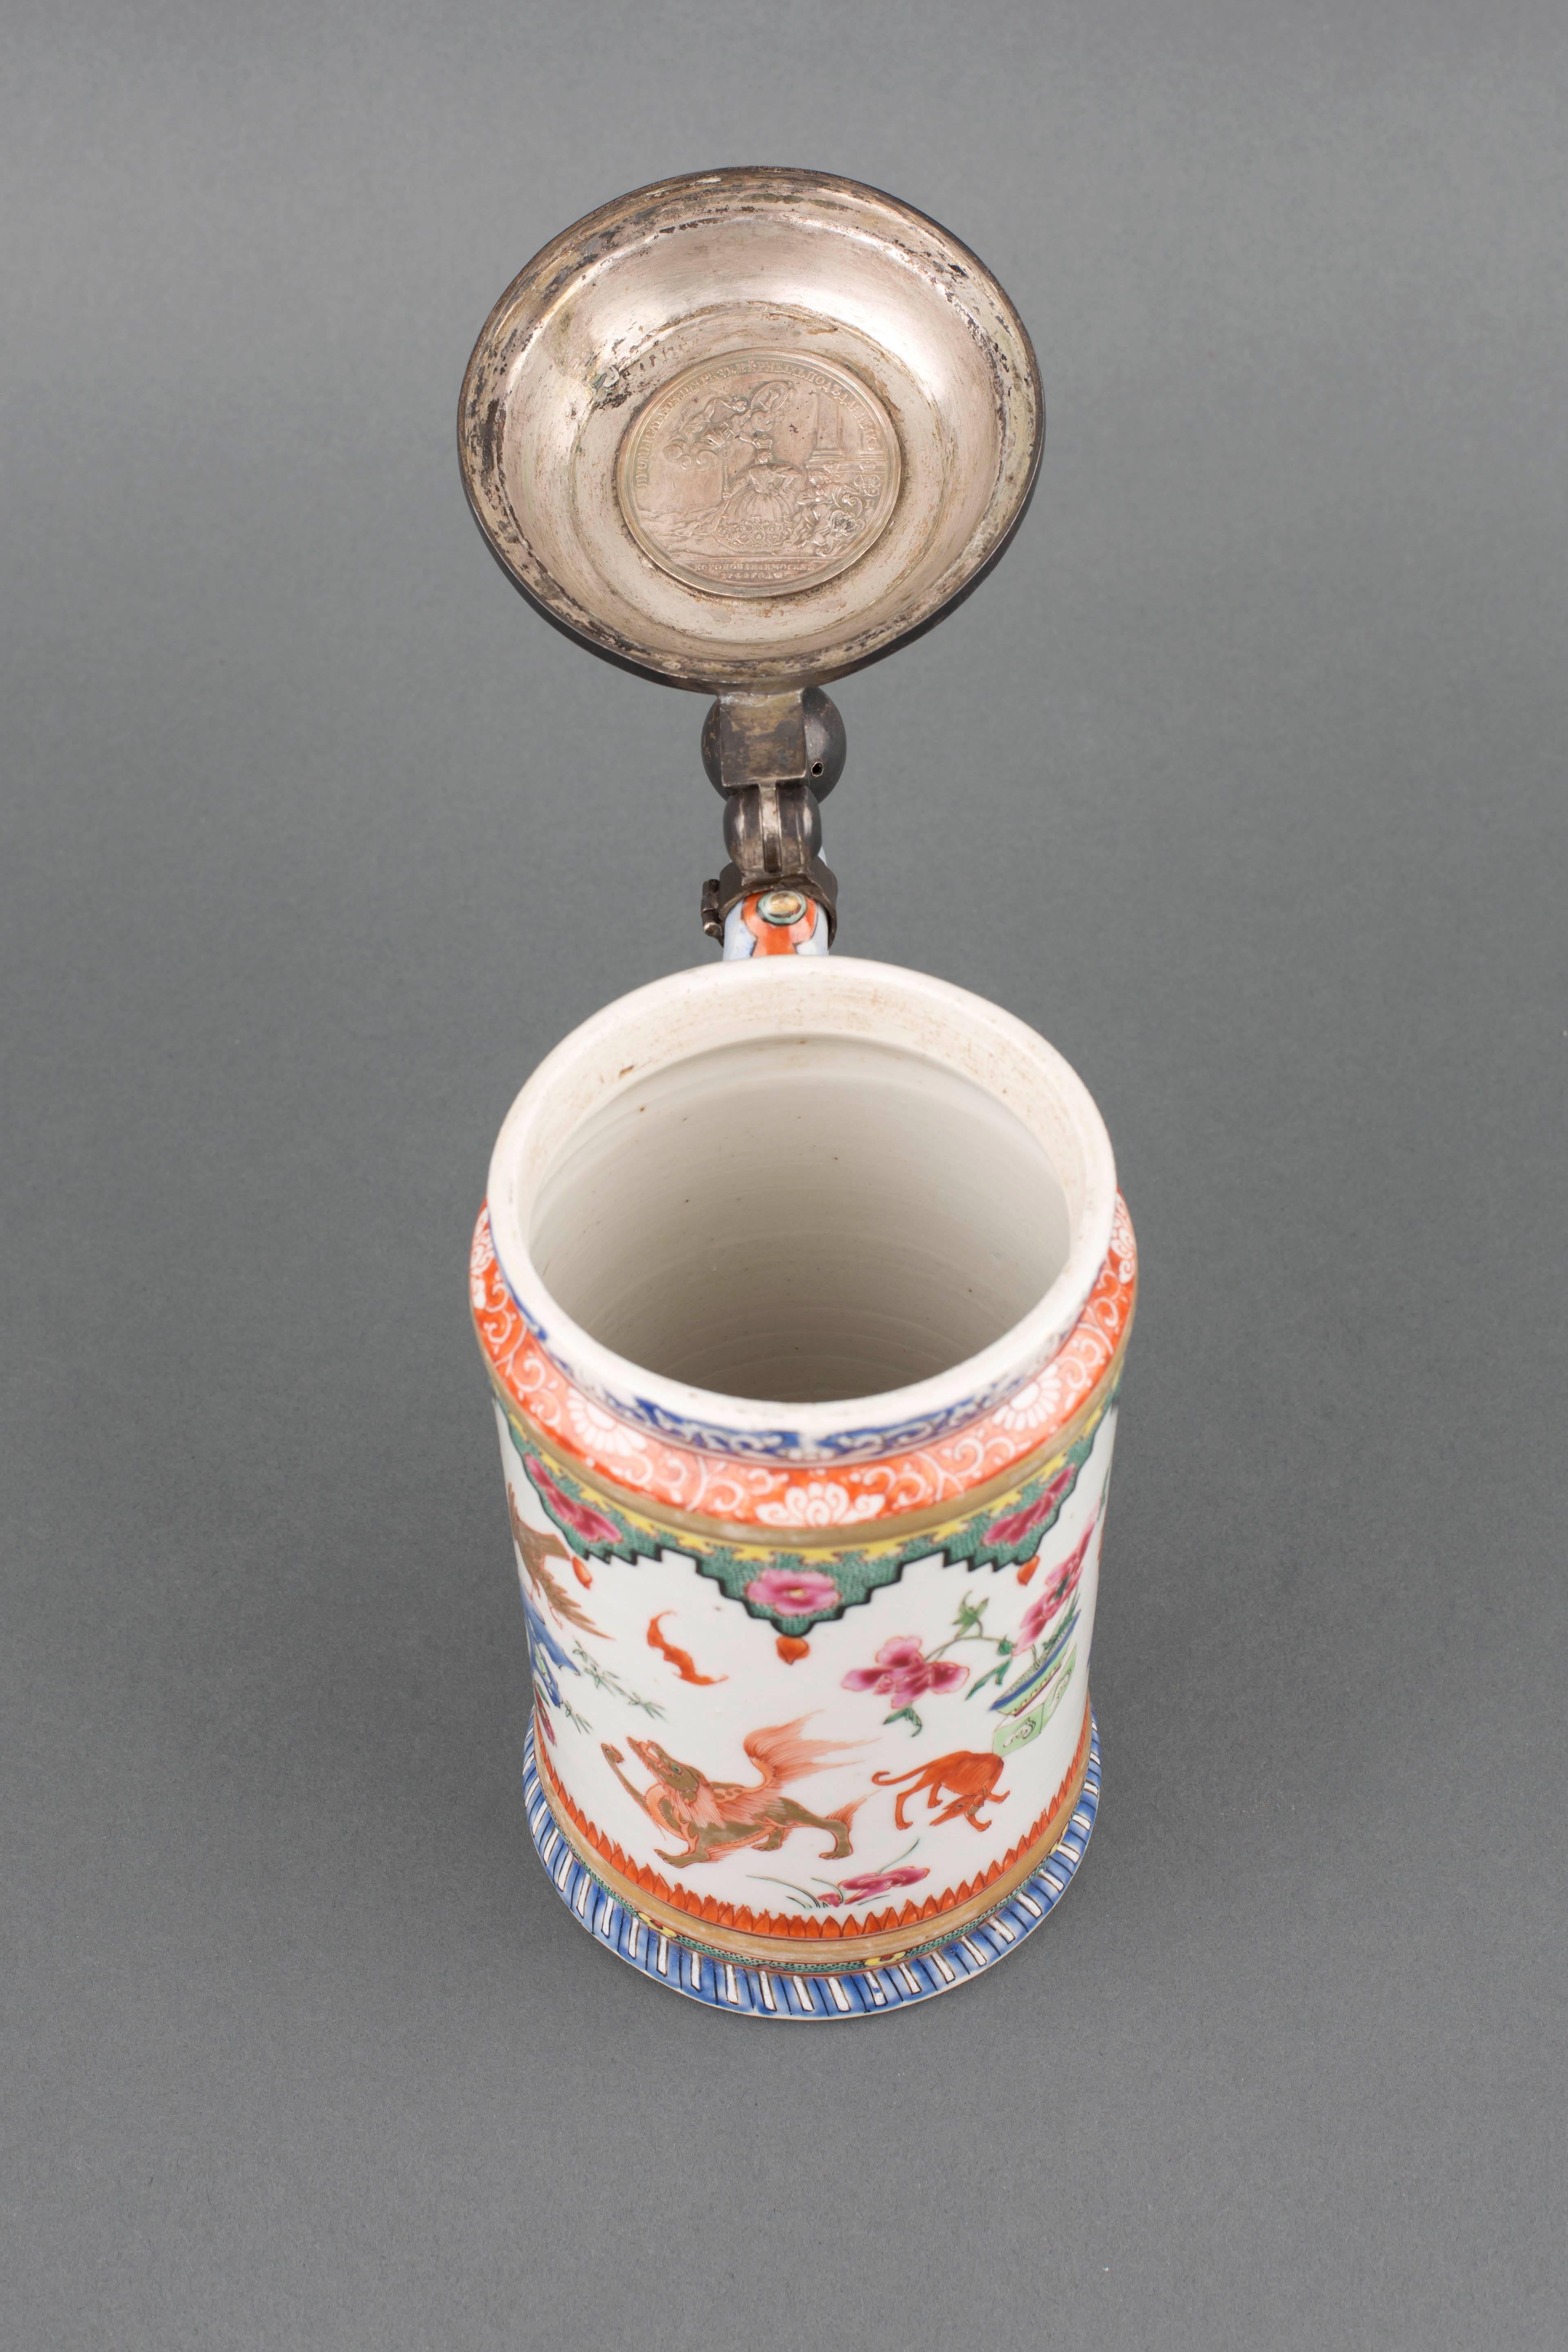 A Chinese export porcelain famille rose tankard with cylindrical body and splayed foot, the handle in the form of a dragon’s body with spine nodules protruding, painted in colored enamels with iron red and gilt with a n open-mouthed cockerel